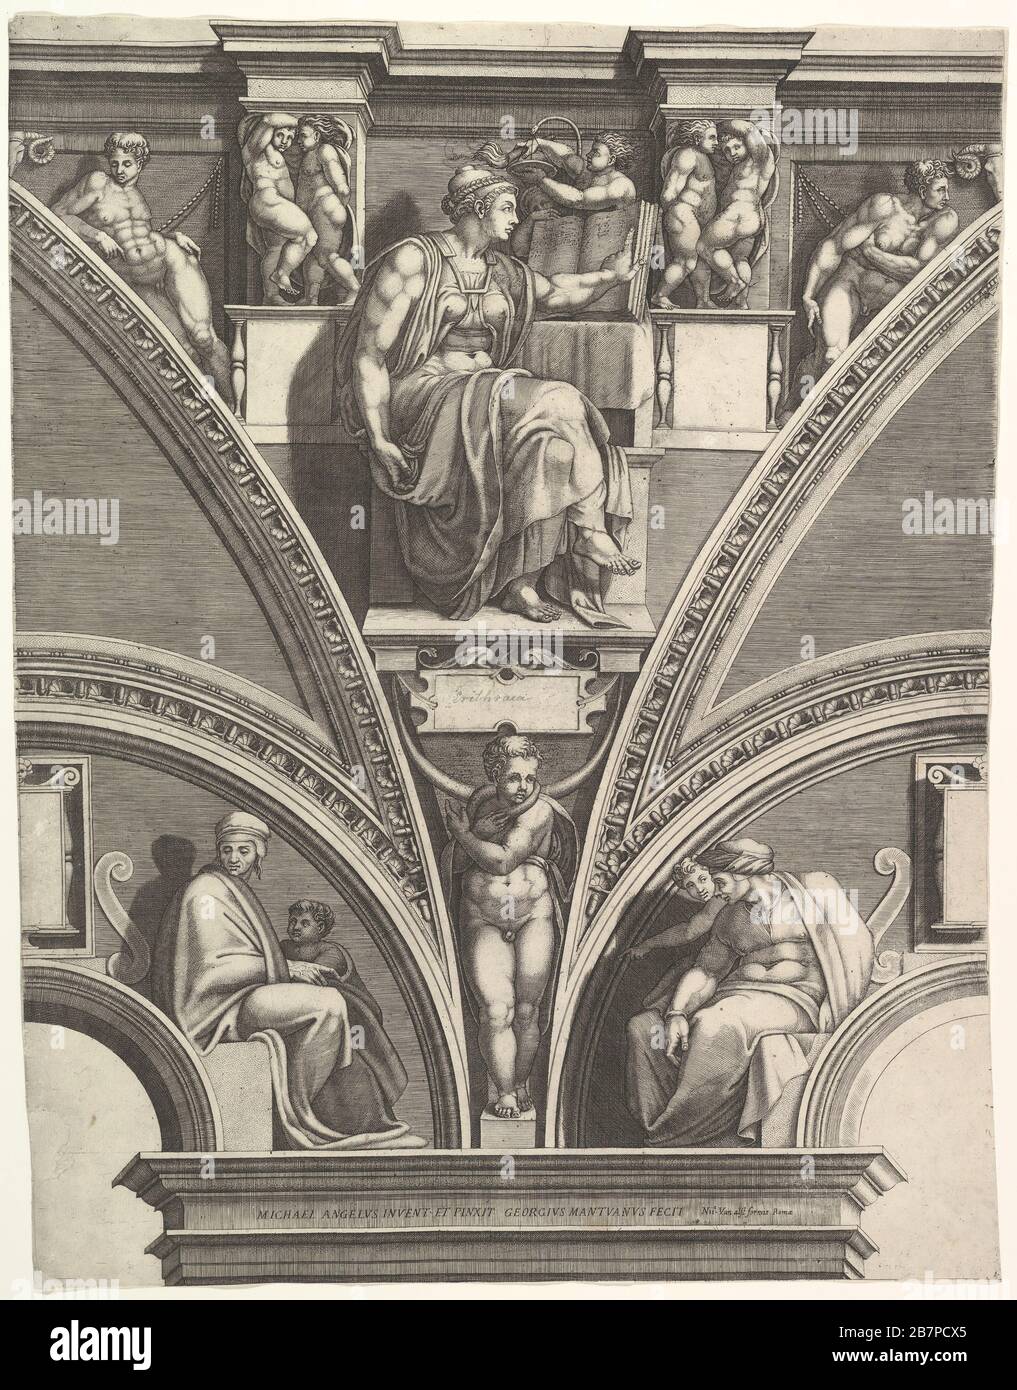 The Eritrean Sibyl; from the series of Prophets and Sibyls in the Sistine Chapel, 1570-75. After Michelangelo Buonarroti Stock Photo